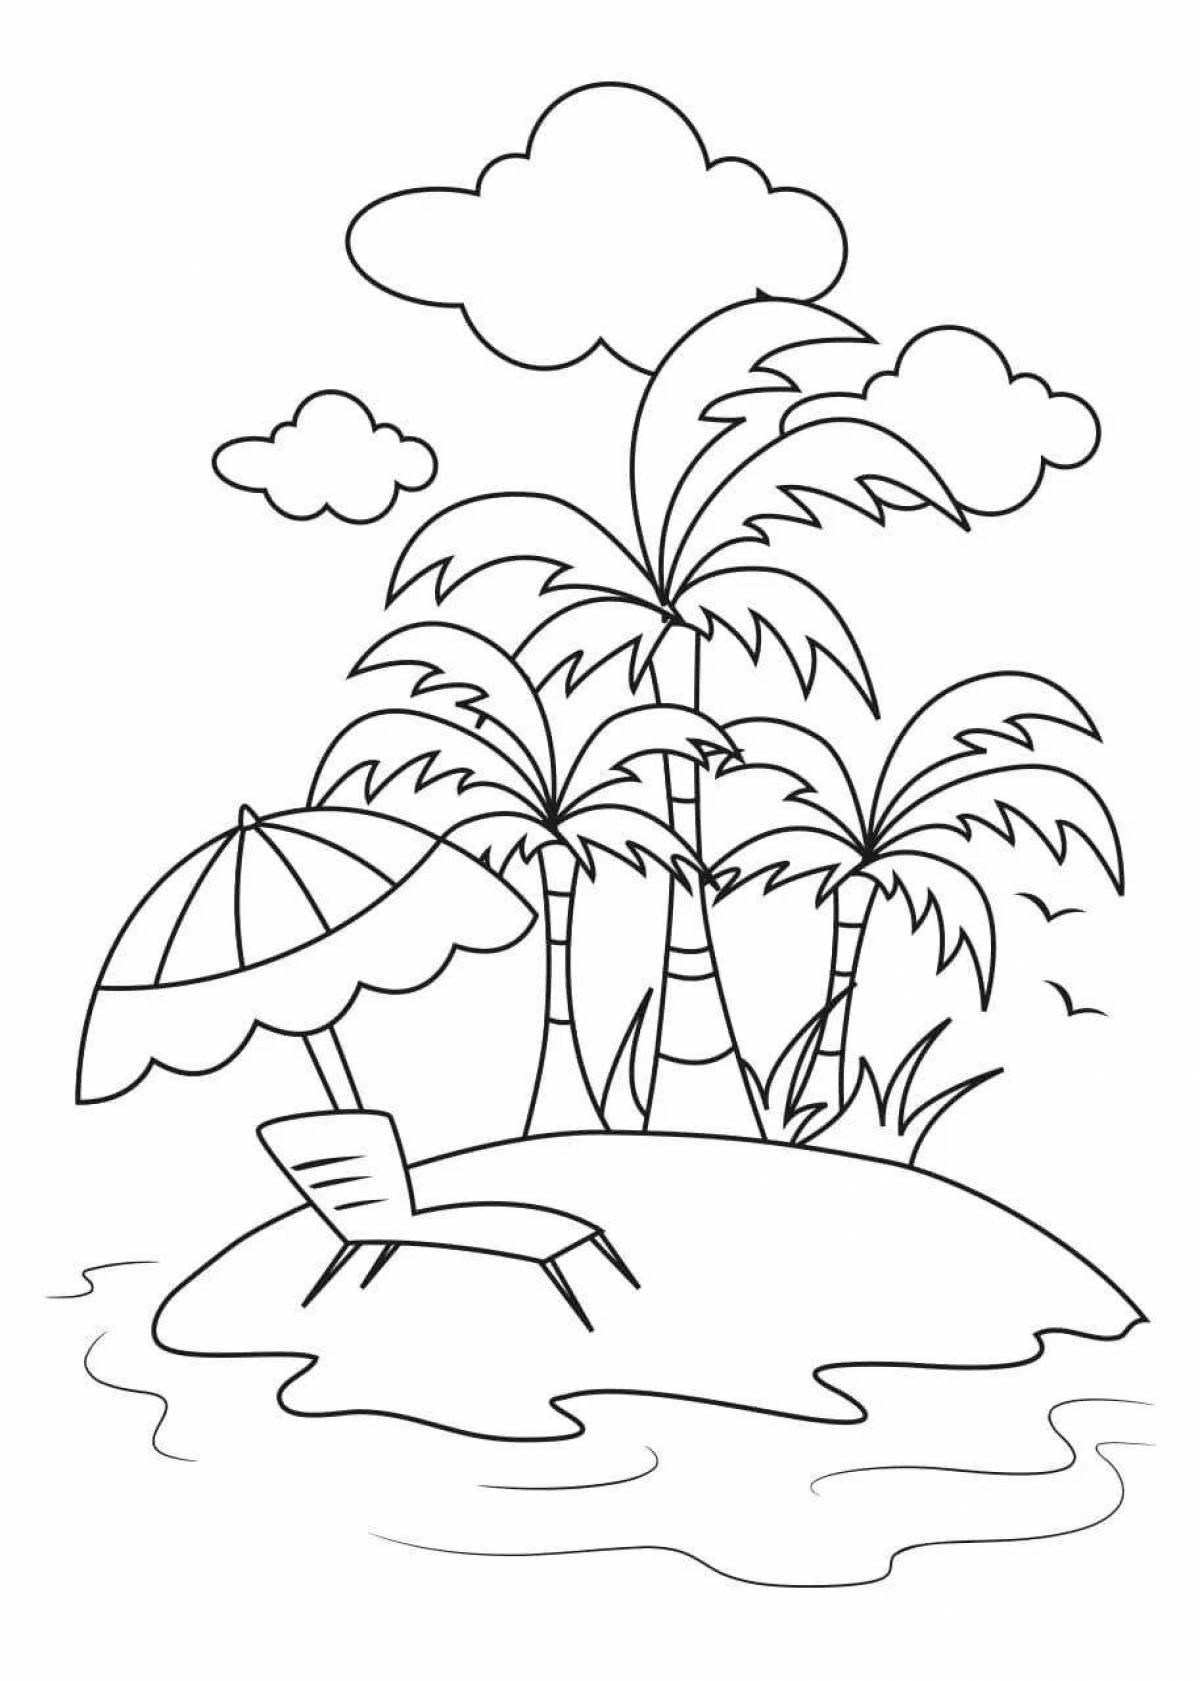 Fabulous desert island coloring page